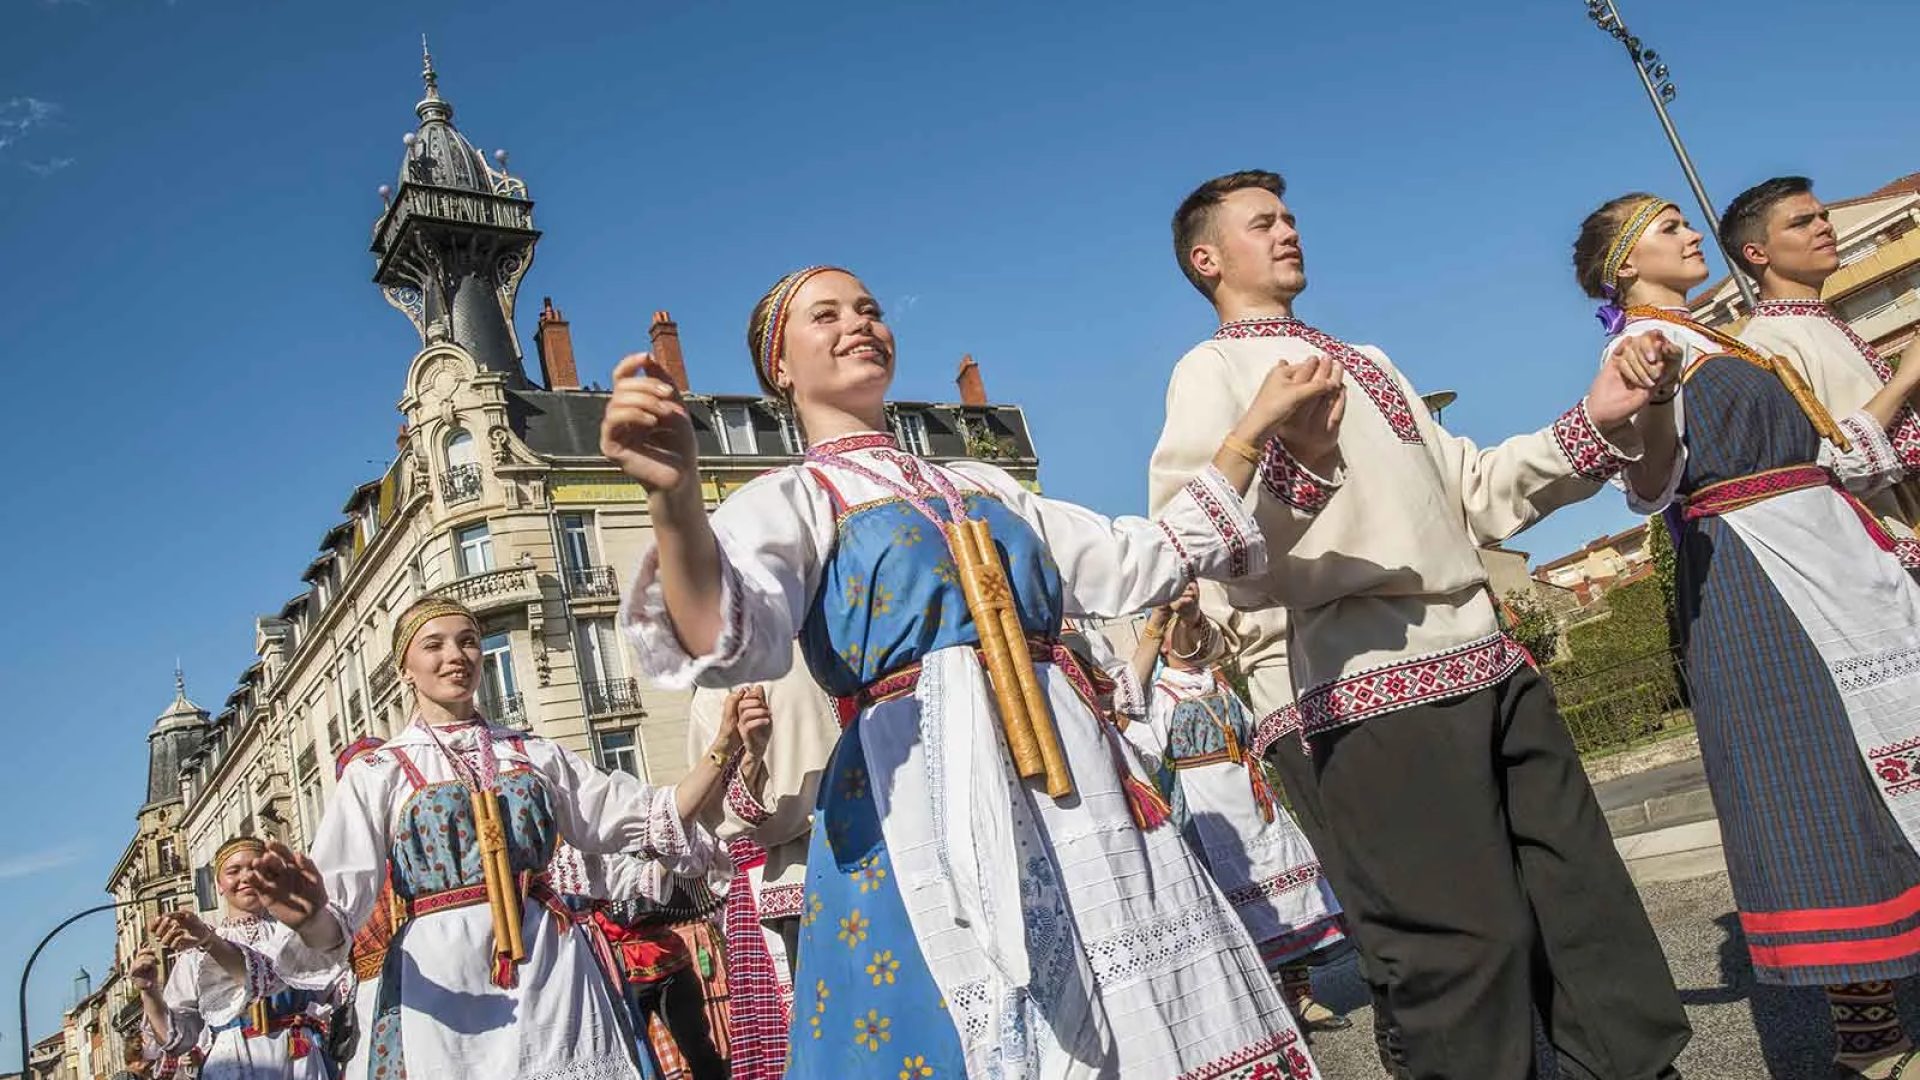 A traditional dance group from the Interfolk Festival at Le Puy-en-Velay in Haute-Loire, Auvergne